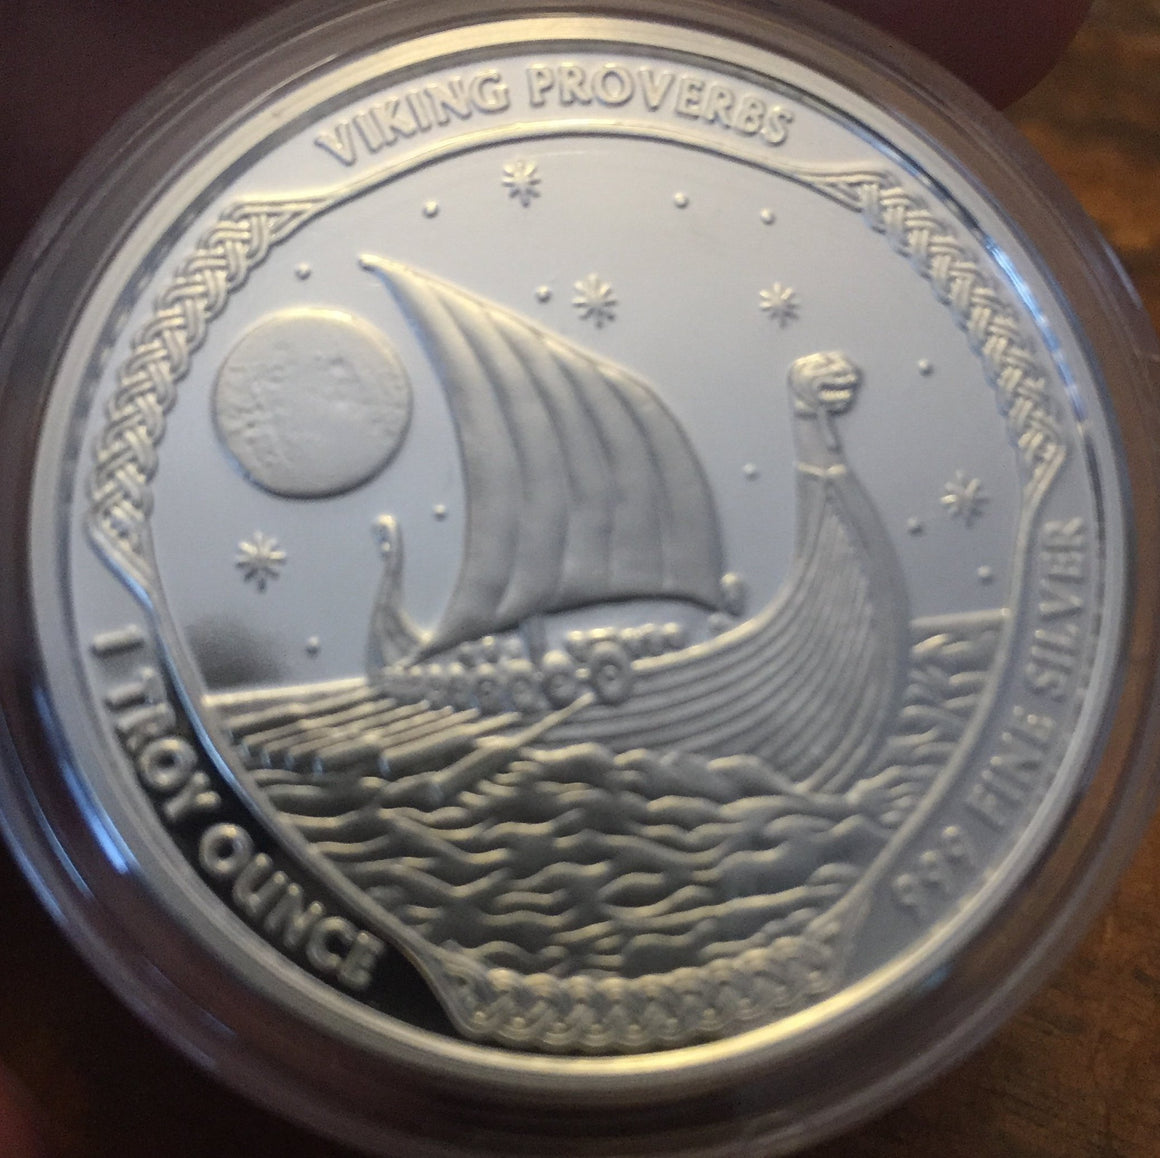 Never Walk Away - Viking Proverb Series - Proof Finish by Ericson Mint, 1oz .999 Fine Silver Round